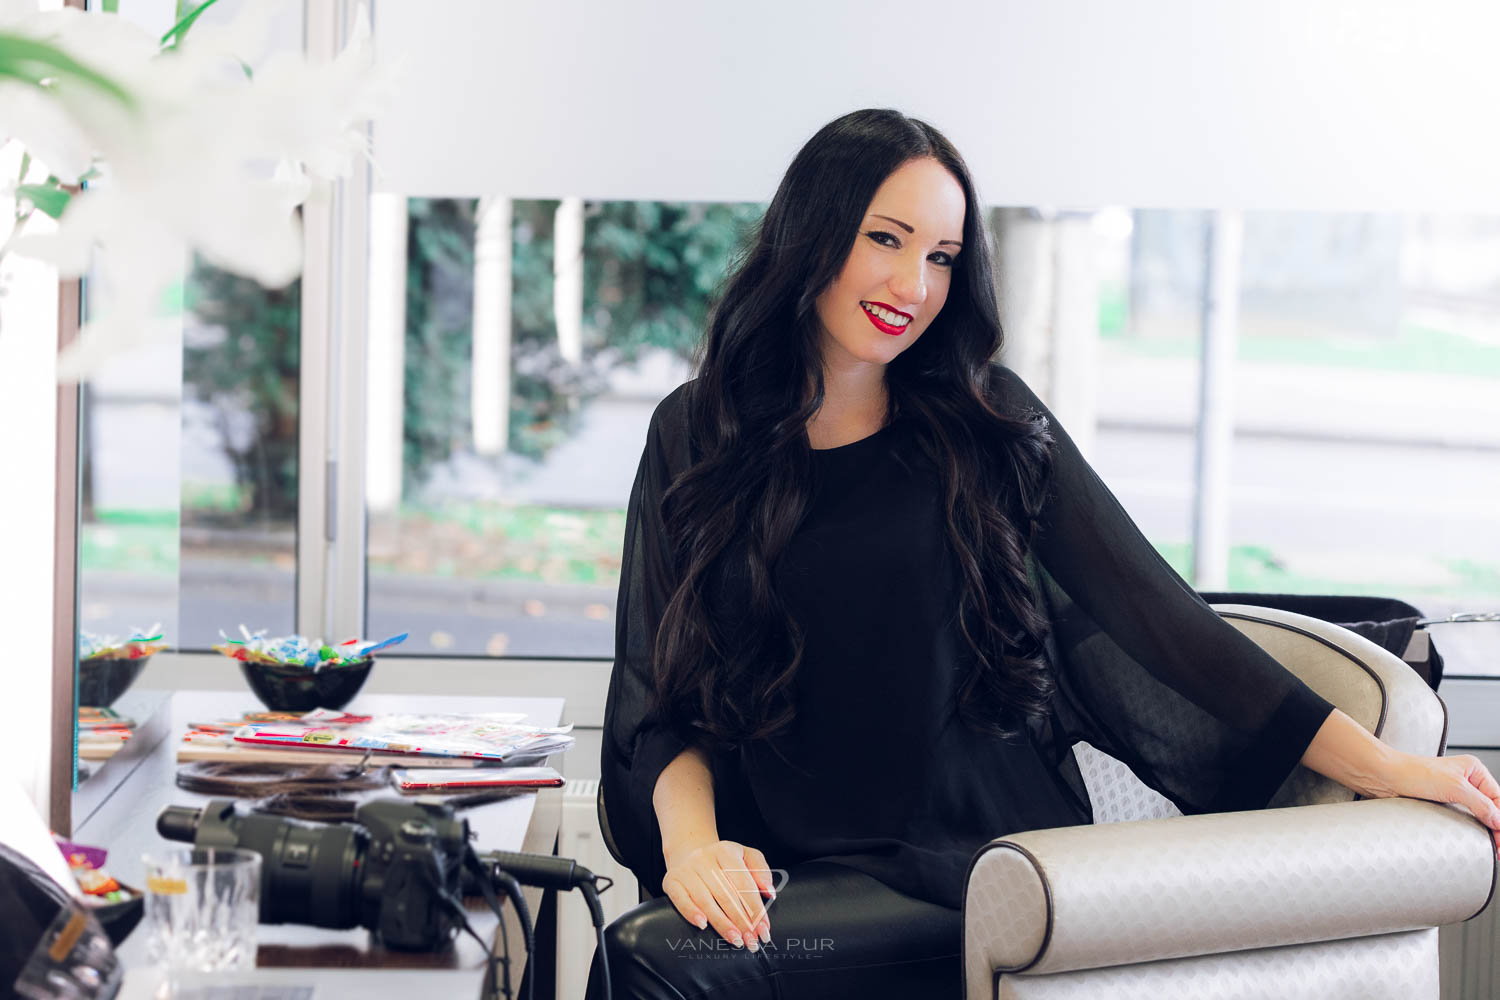 Experience at Melina Best hairdresser, extensions questions & gift idea - extensions and hair extensions - questions about hair extensions and hair thickening - tapes or bondings - what to consider, care and duration, costs and experience - Melina Best in Cologne